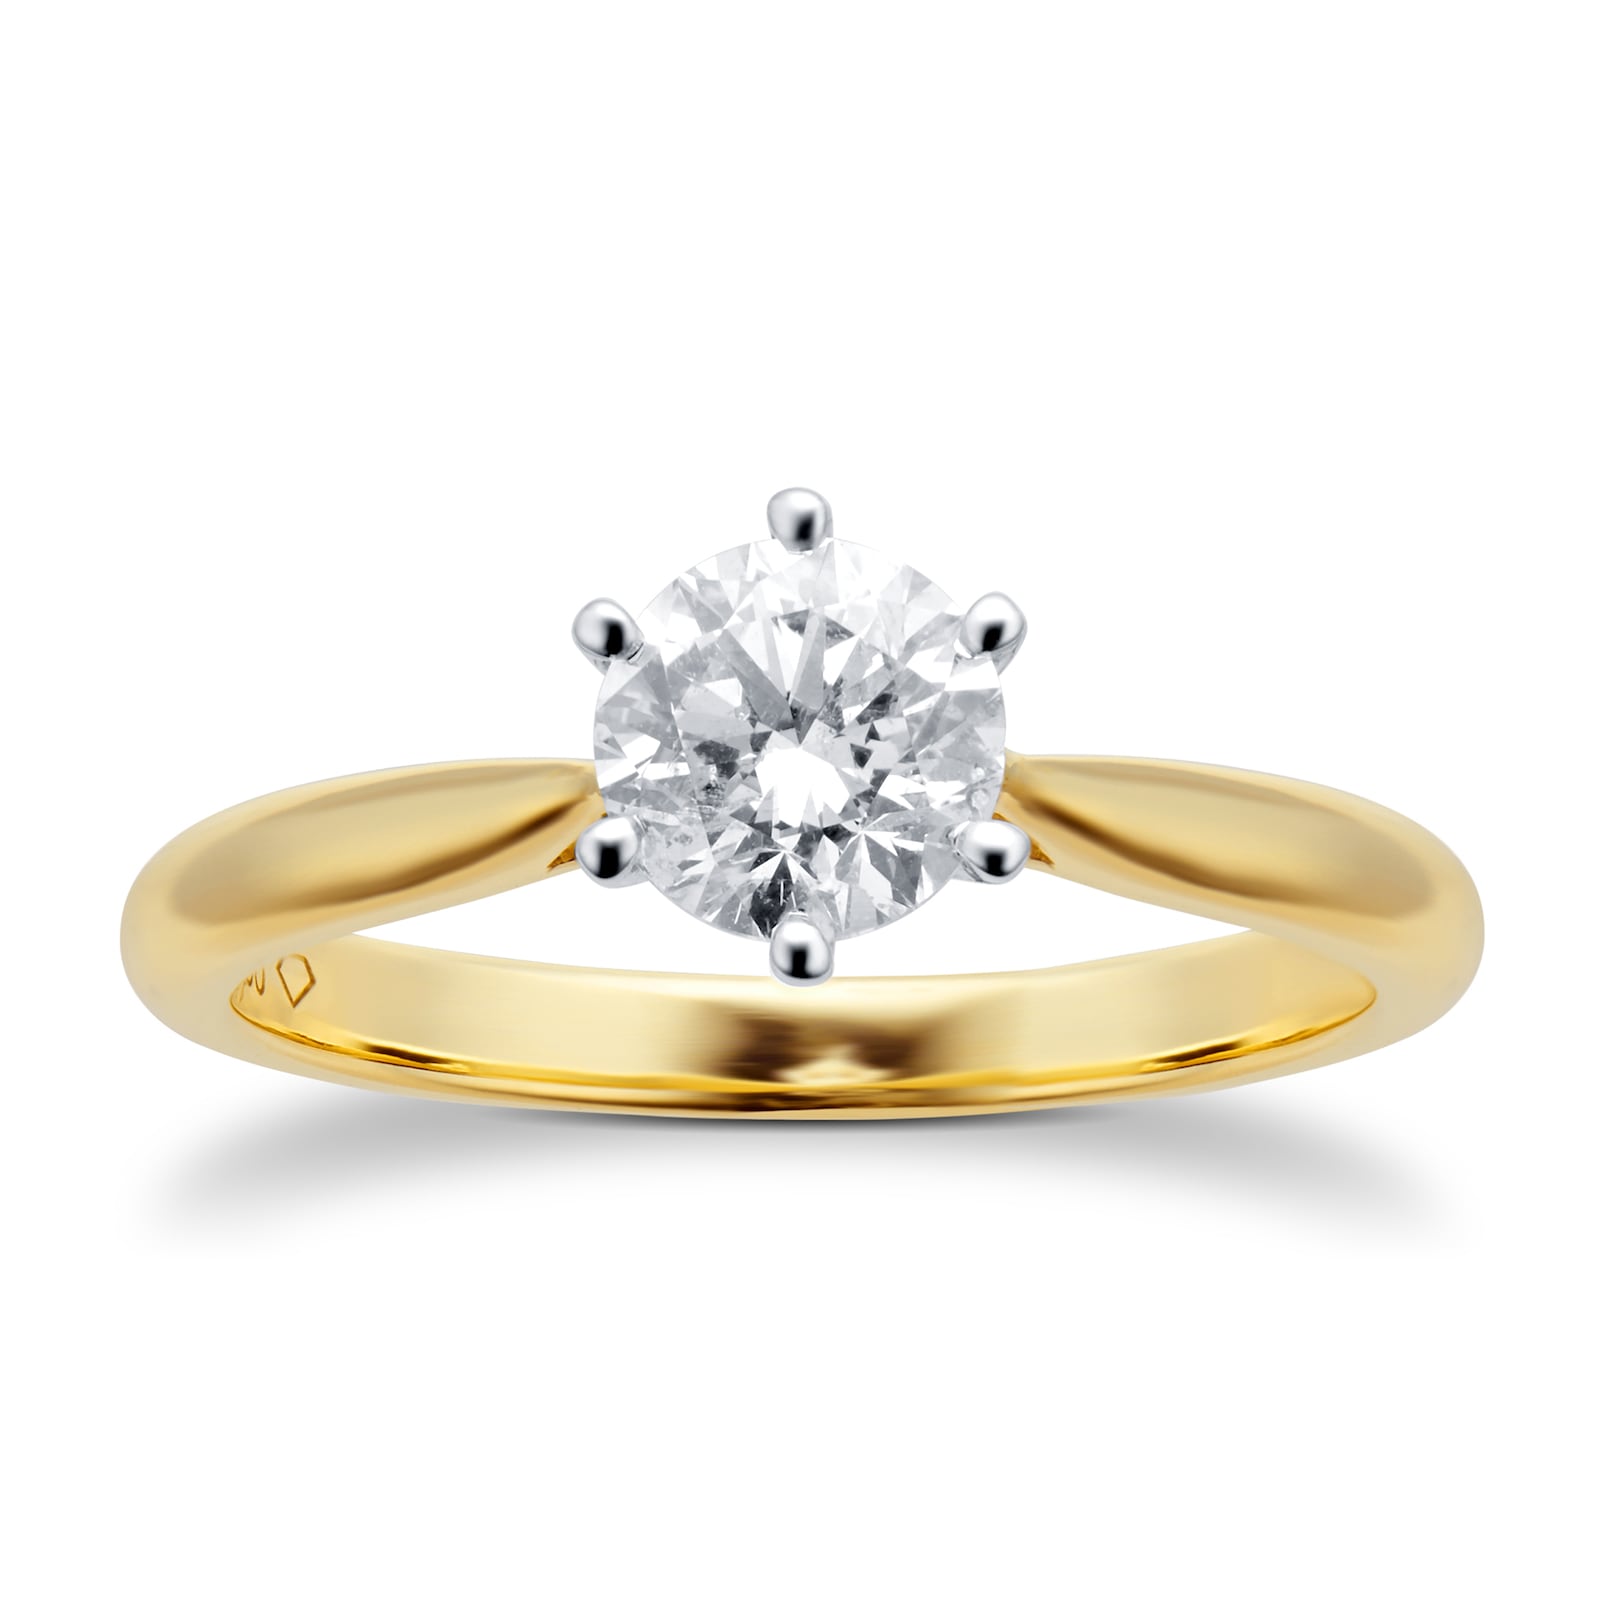 Goldsmiths 18ct Yellow Gold 0.70ct Diamond Solitaire Ring RX3957 Q1 ...